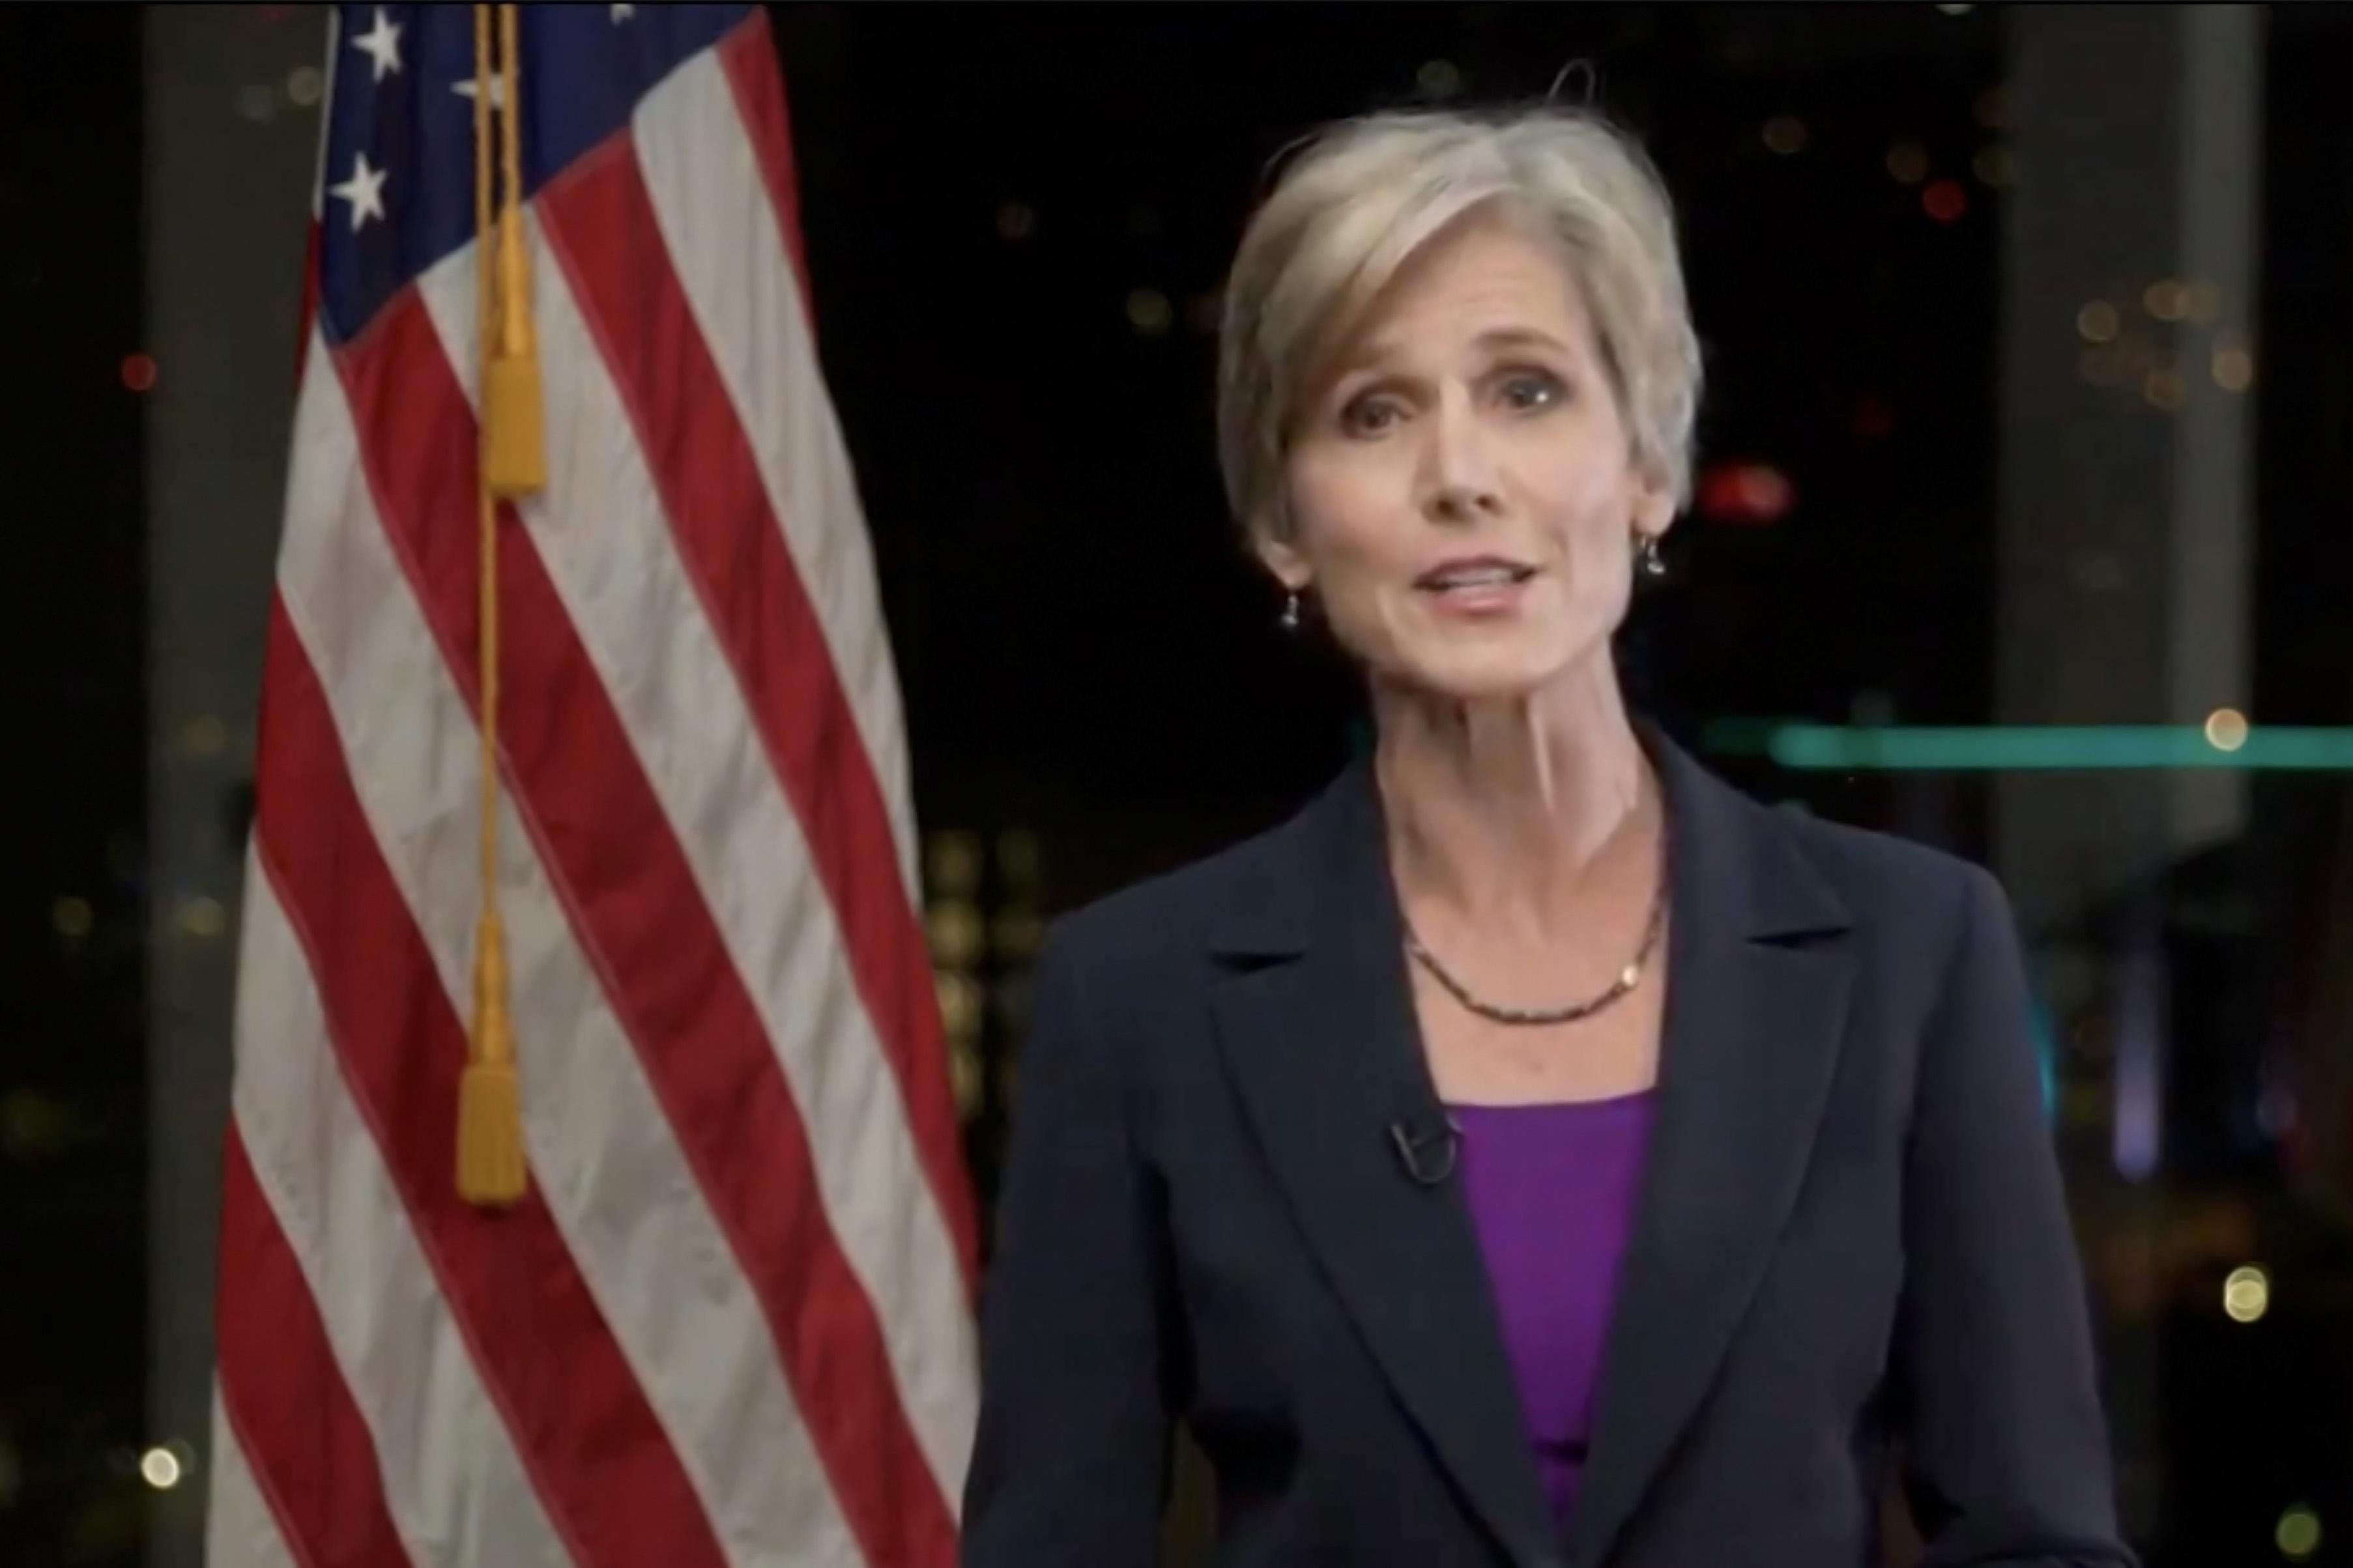 Yates speaks, standing in front of an American flag.